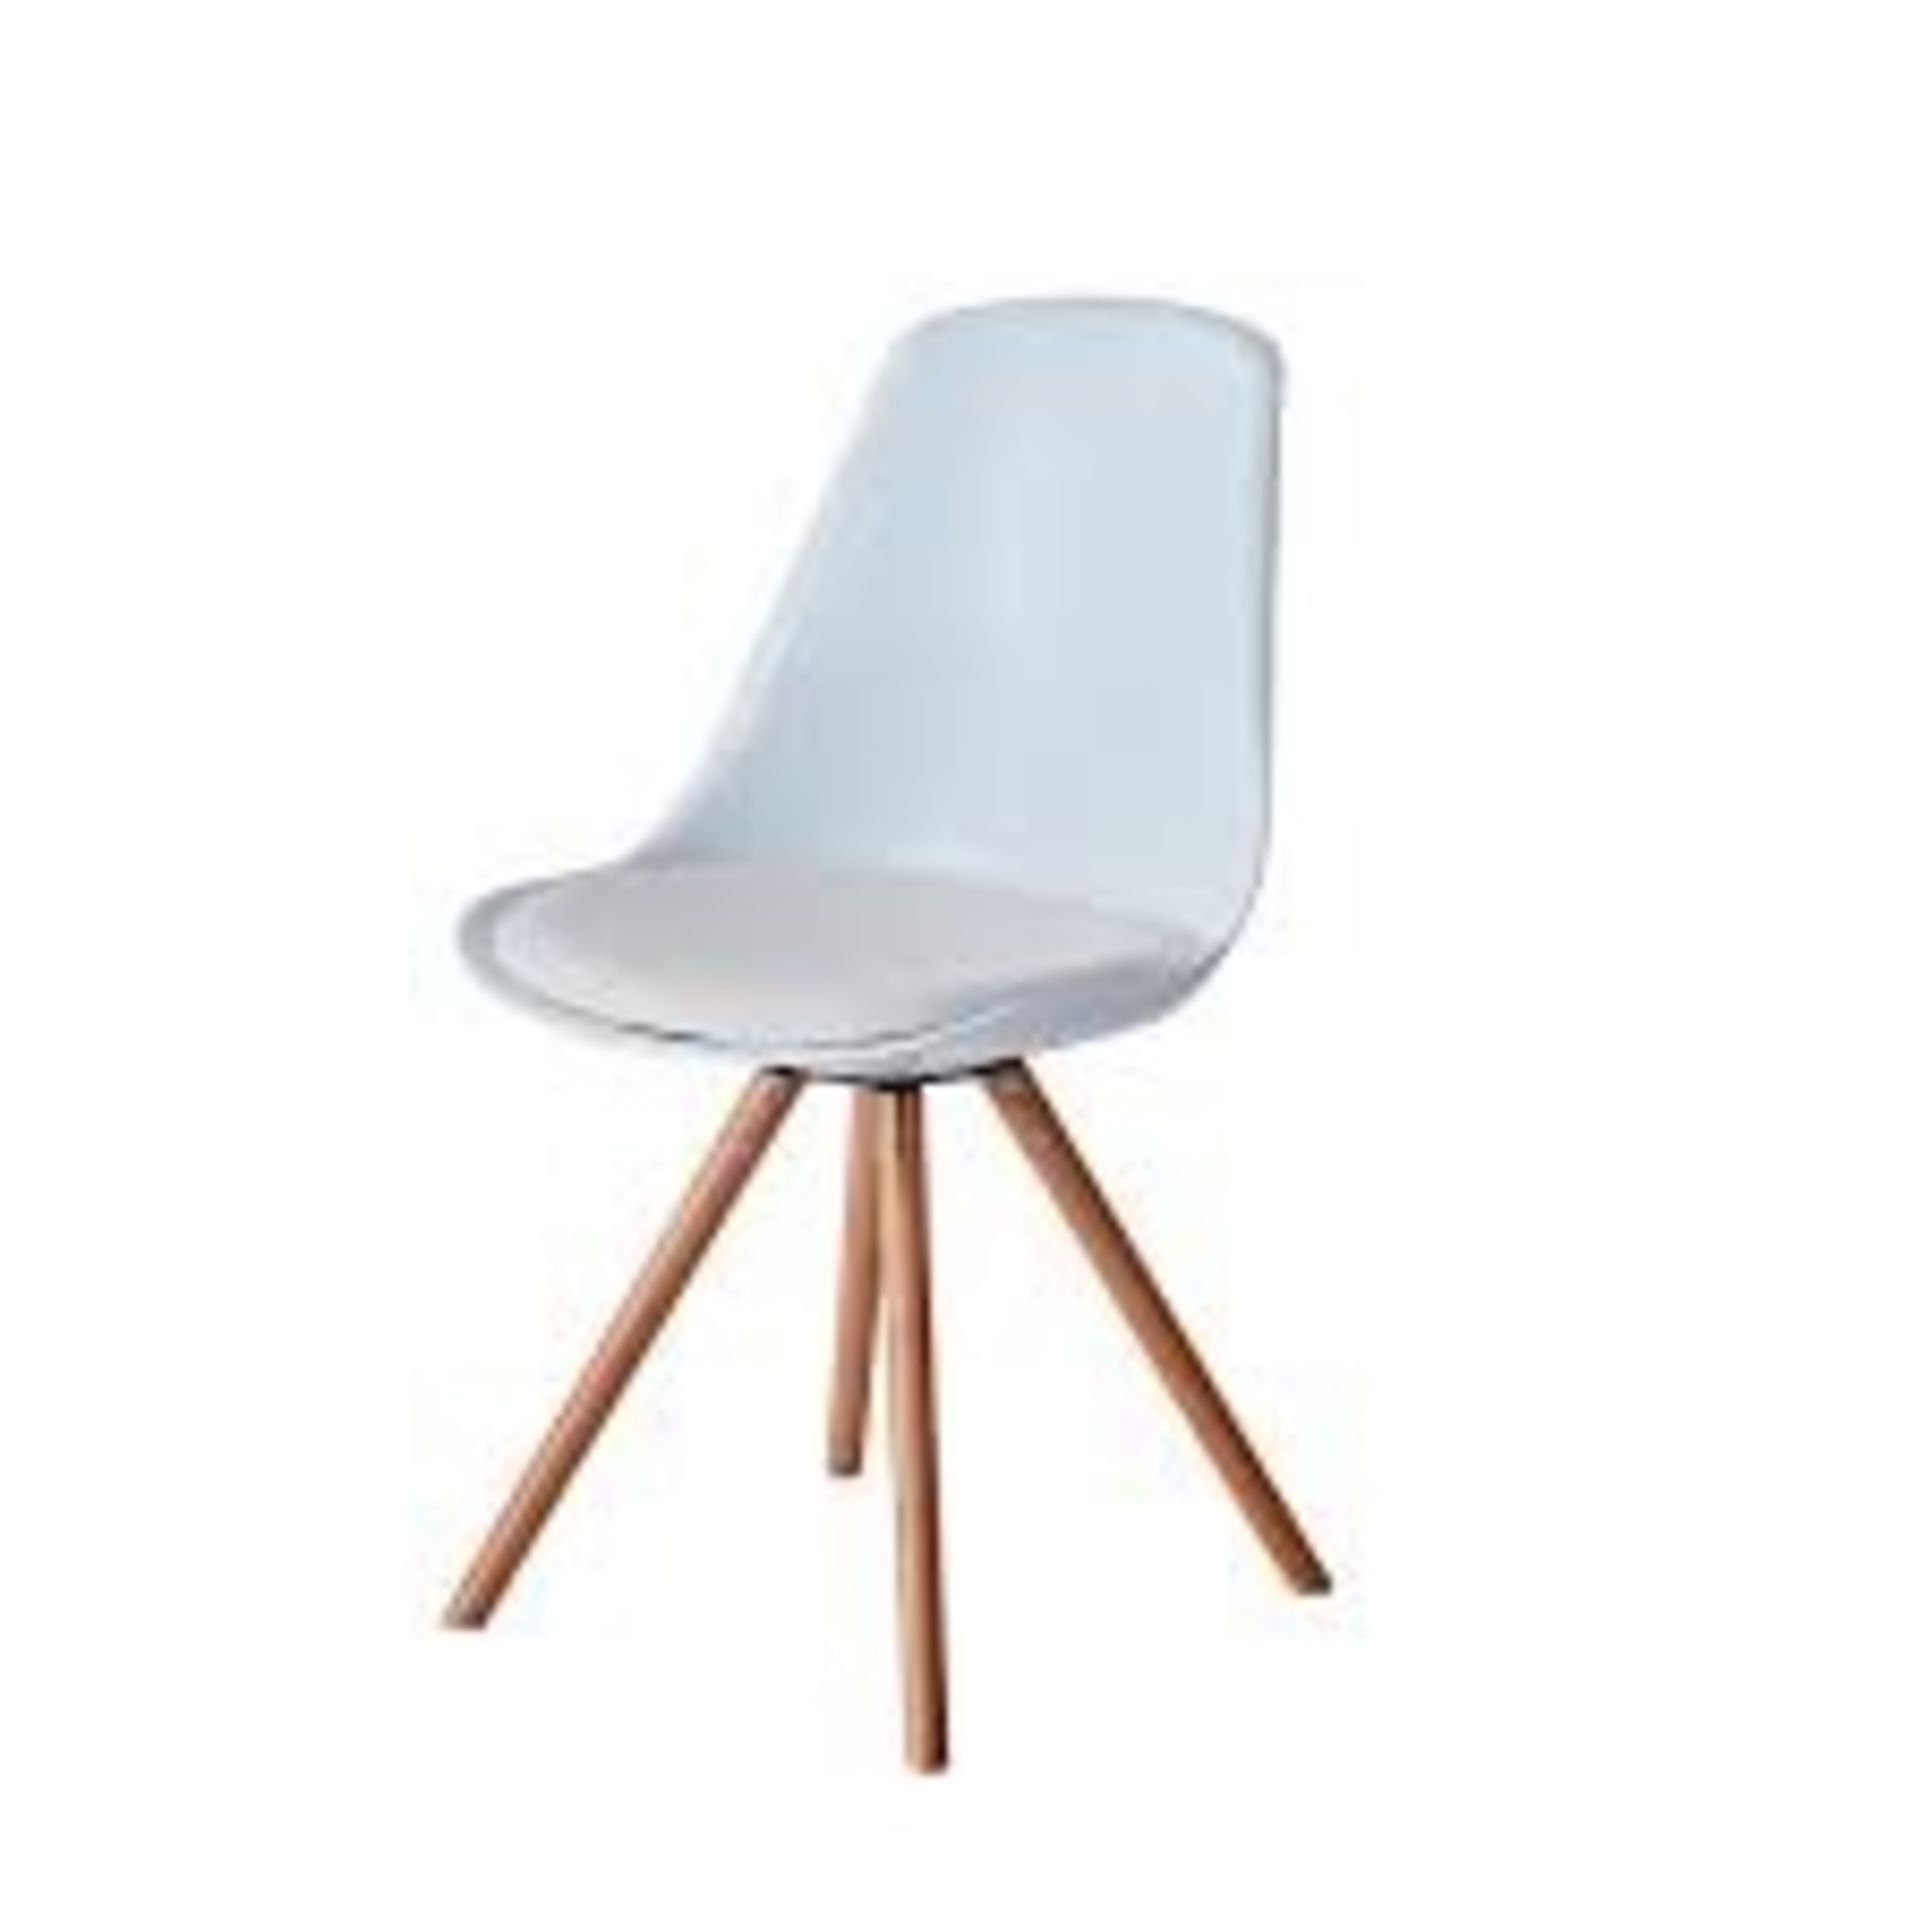 Set of 4 x 'TURNER' Contemporary Scandinavian-style Dining Chairs in White - Mid Century Design With - Image 3 of 4